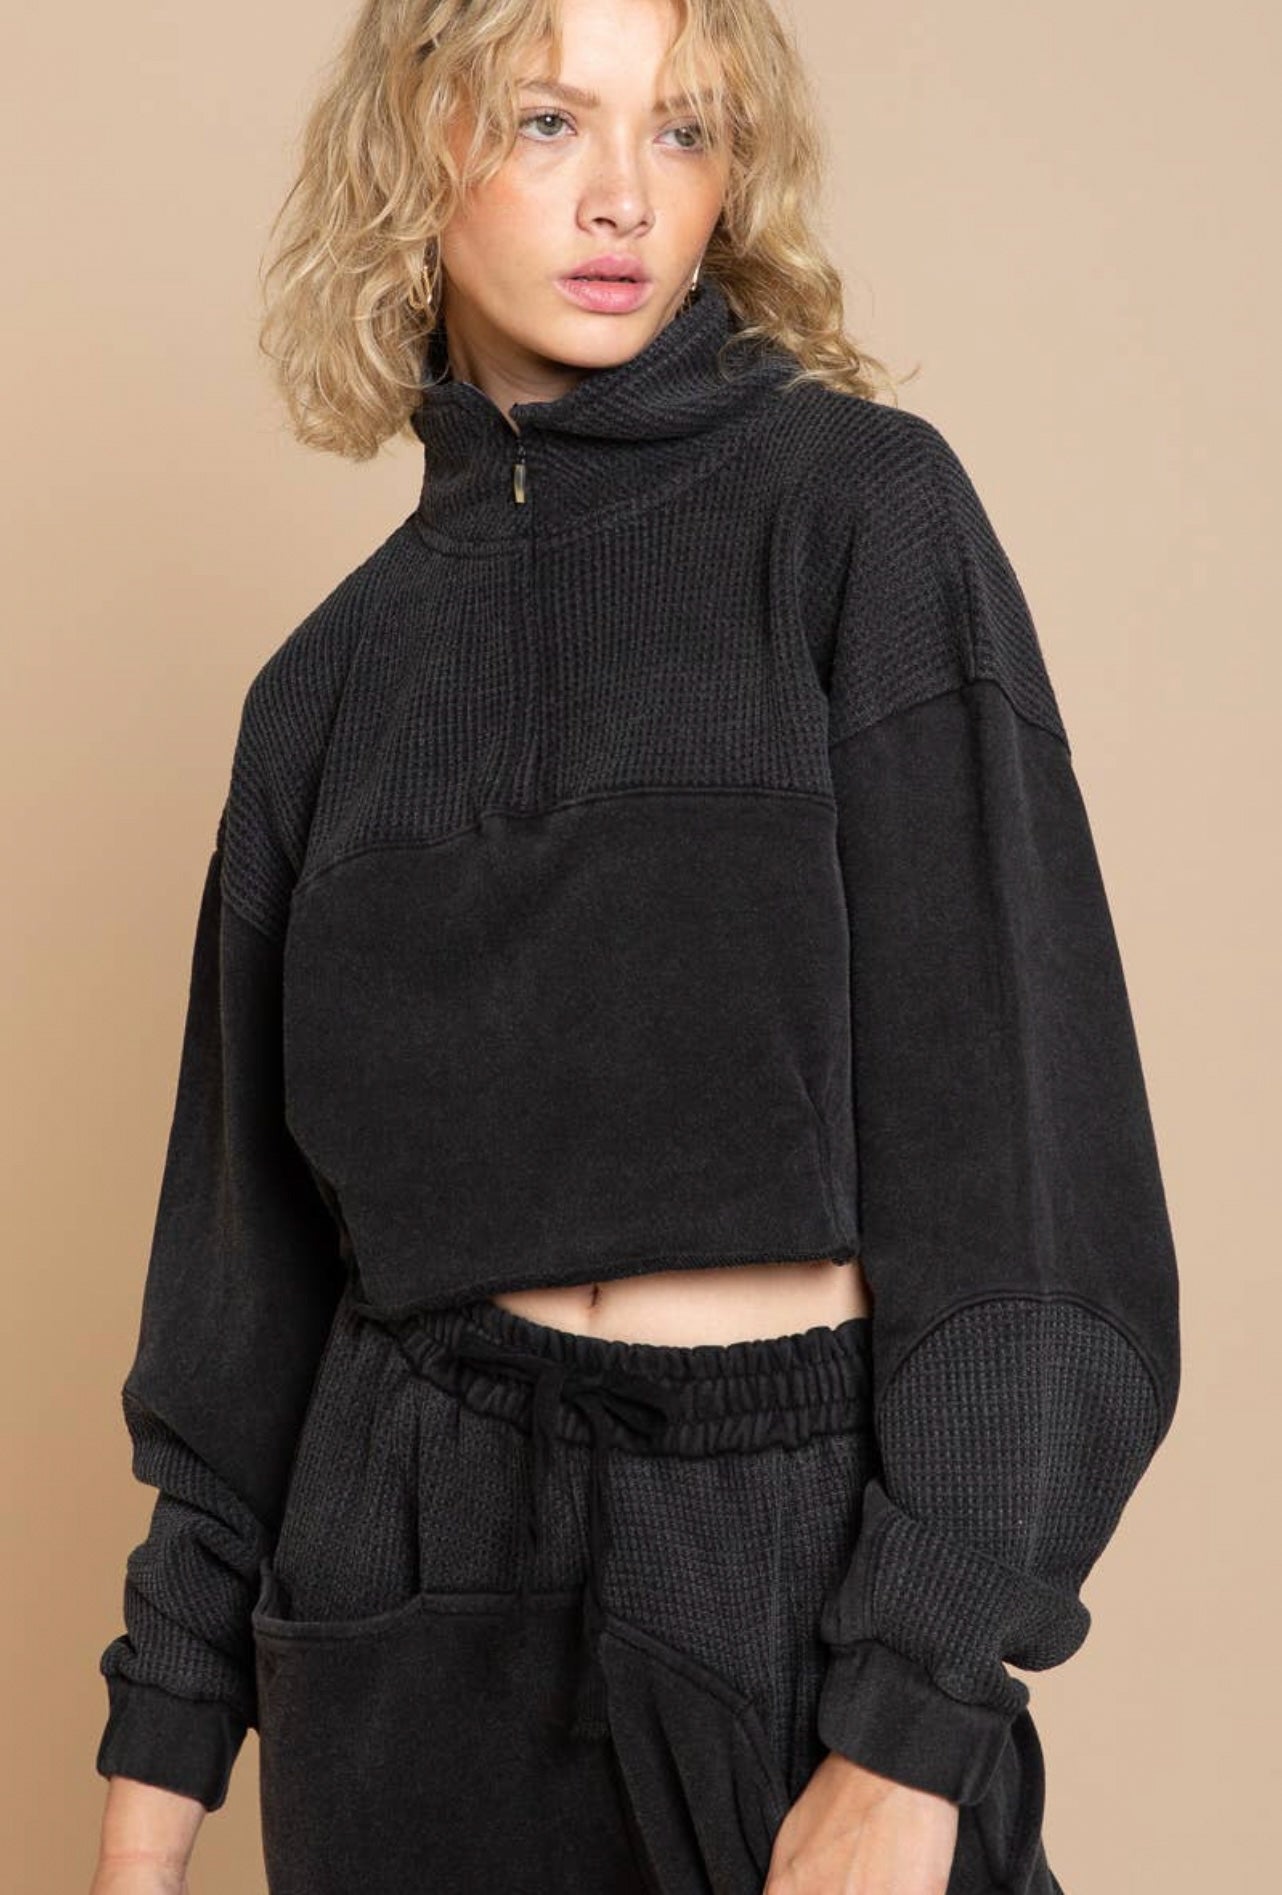 Maeve Half Zip Cropped Micro Waffle Knit French Terry Pullover - Yoga Bitch